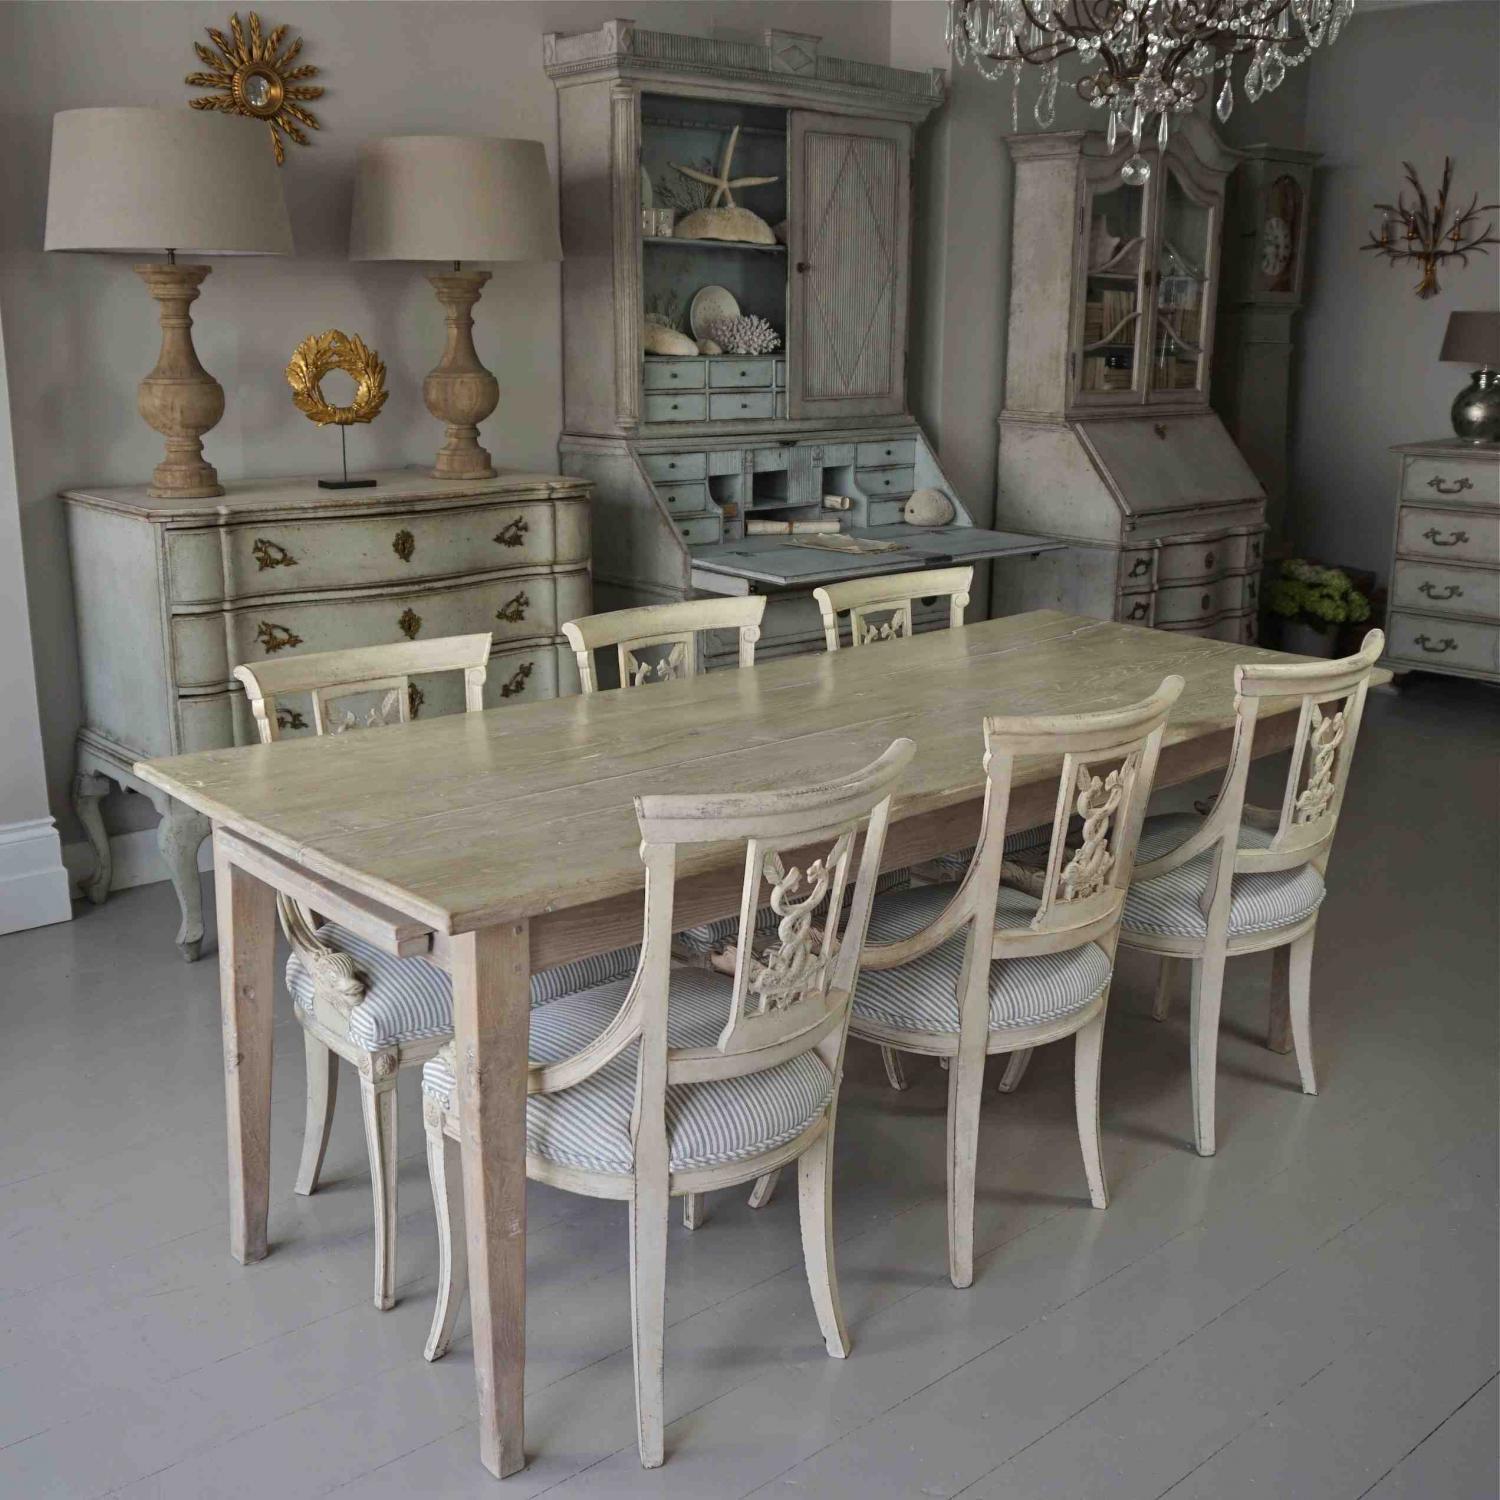 BEAUTIFUL FRENCH FARMHOUSE DINING TABLE